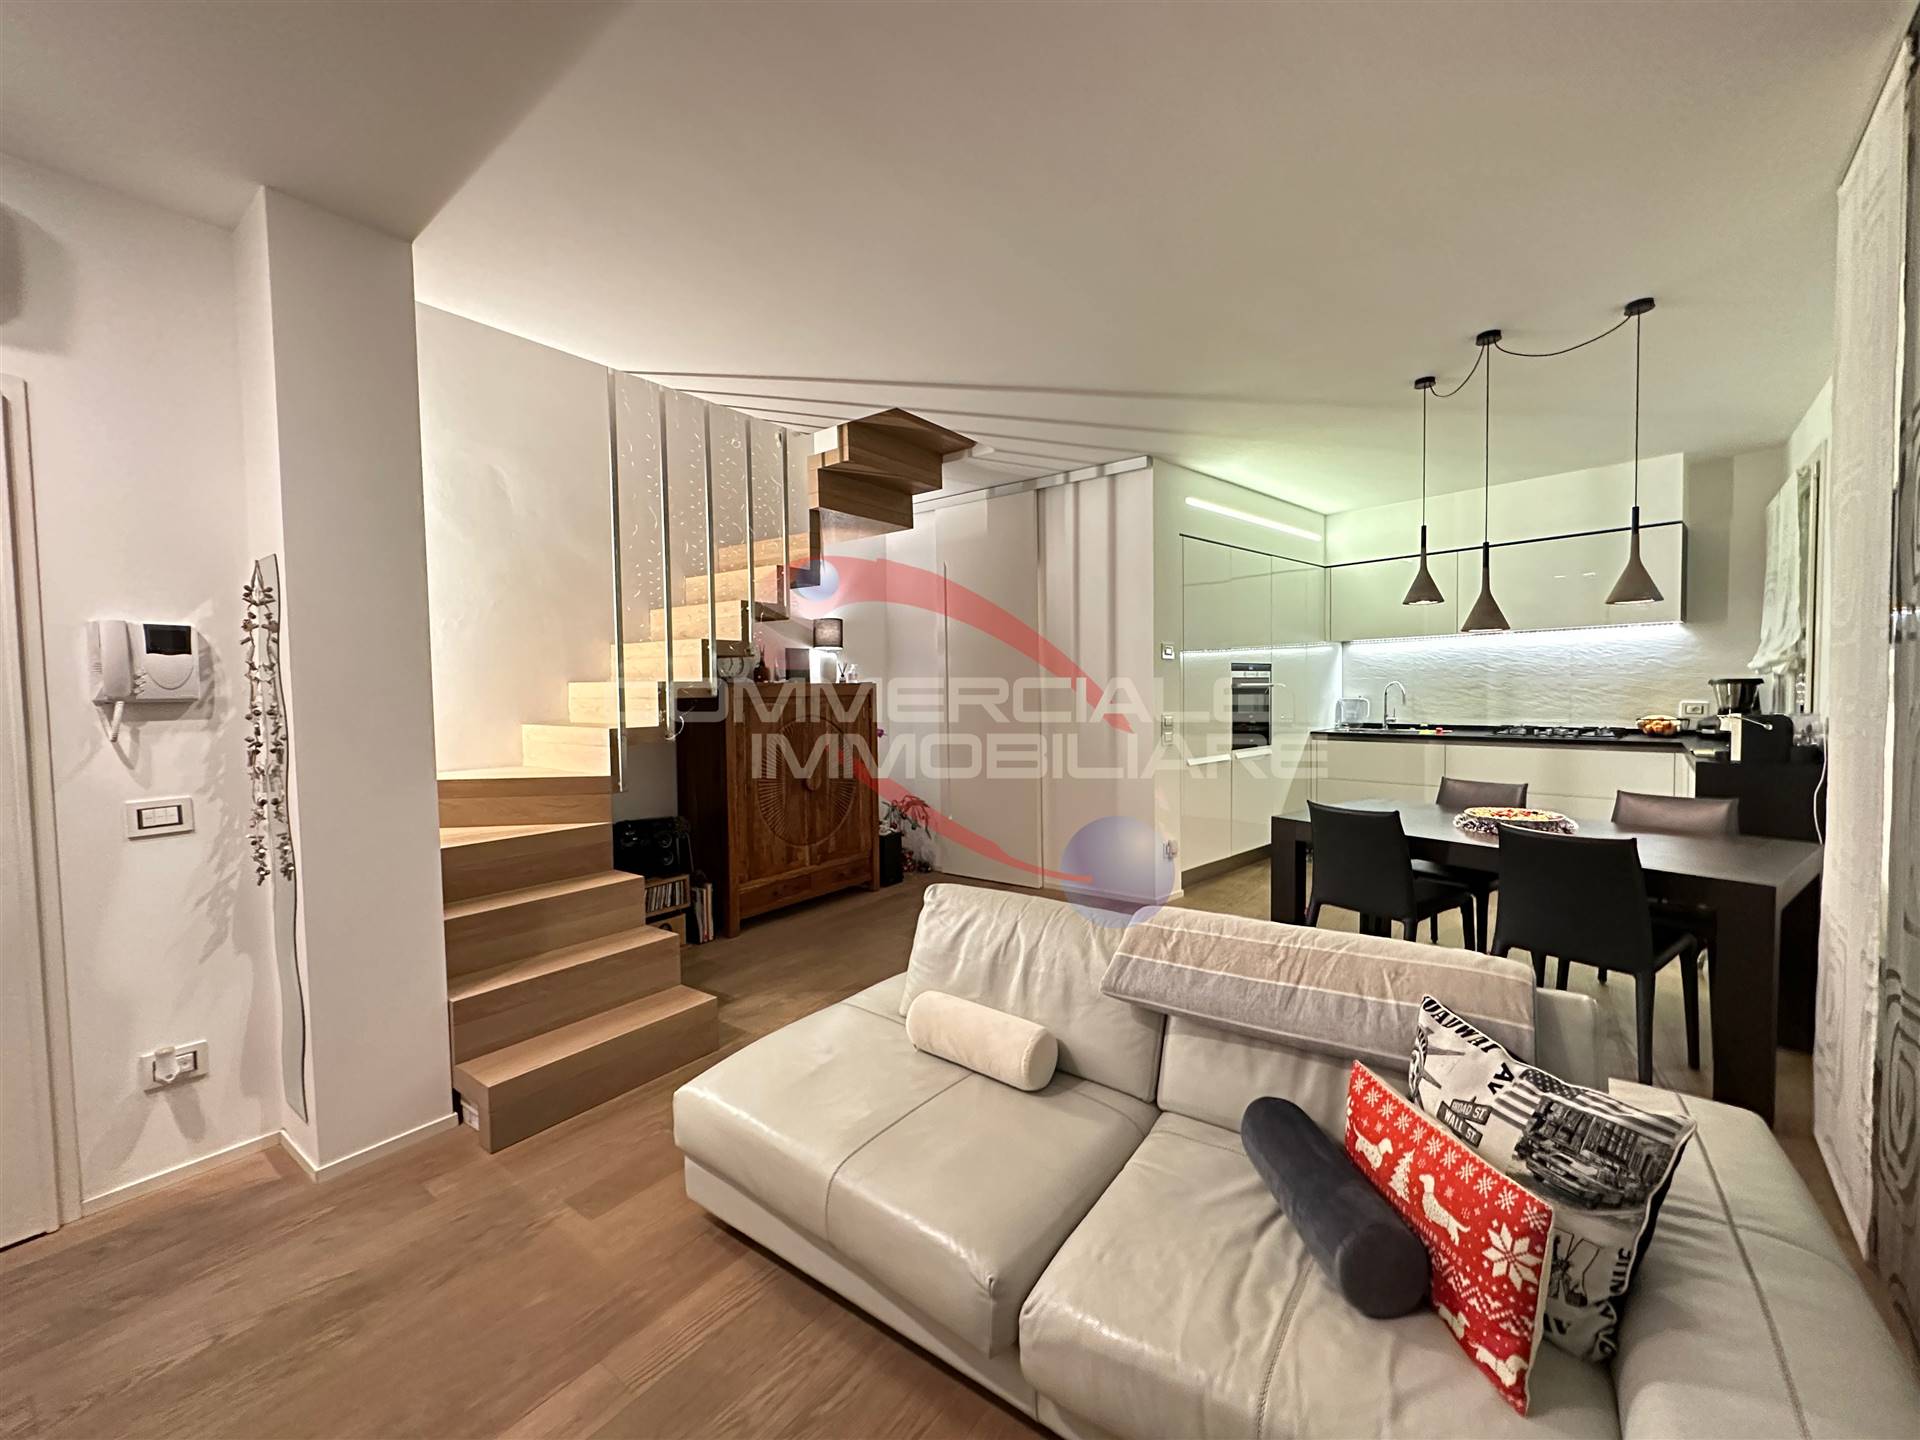 SOTTOMARINA, CHIOGGIA, Apartment for sale of 80 Sq. mt., Almost new, Heating Individual heating system, Energetic class: G, placed at 2° on 3, 